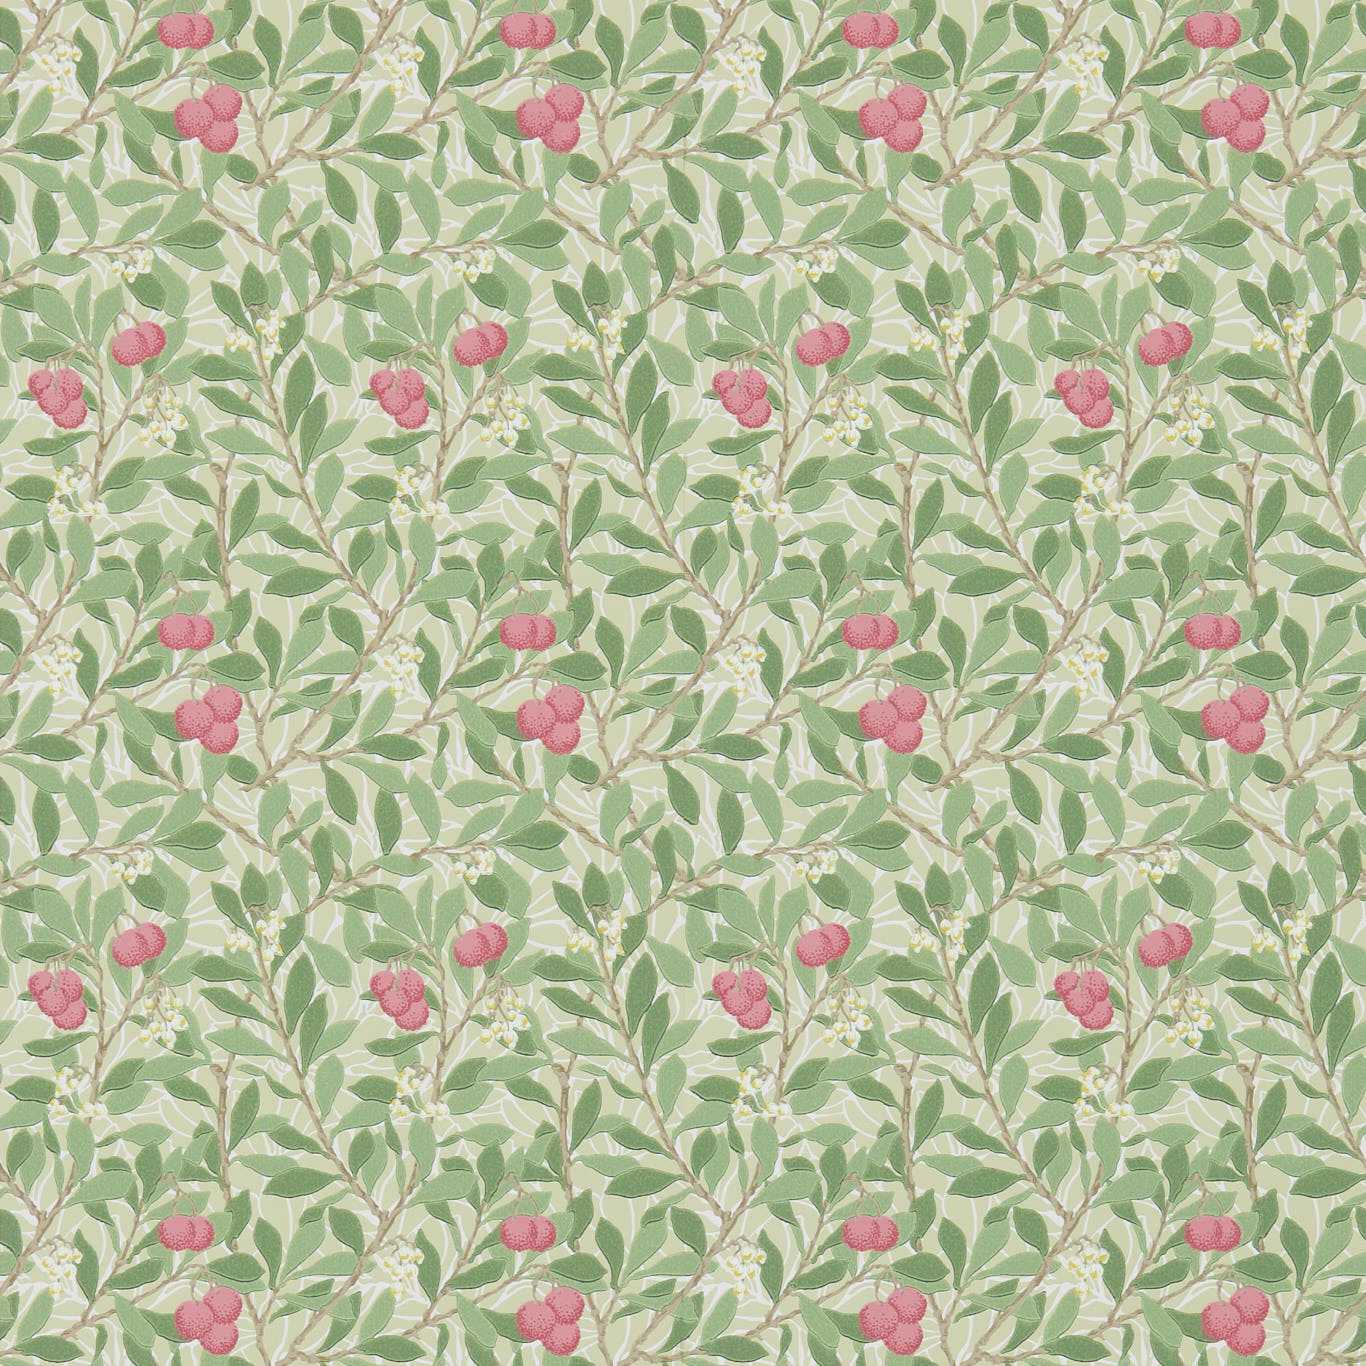 Arbutus Olive/Pink Wallpaper DM3W214720 by Morris & Co